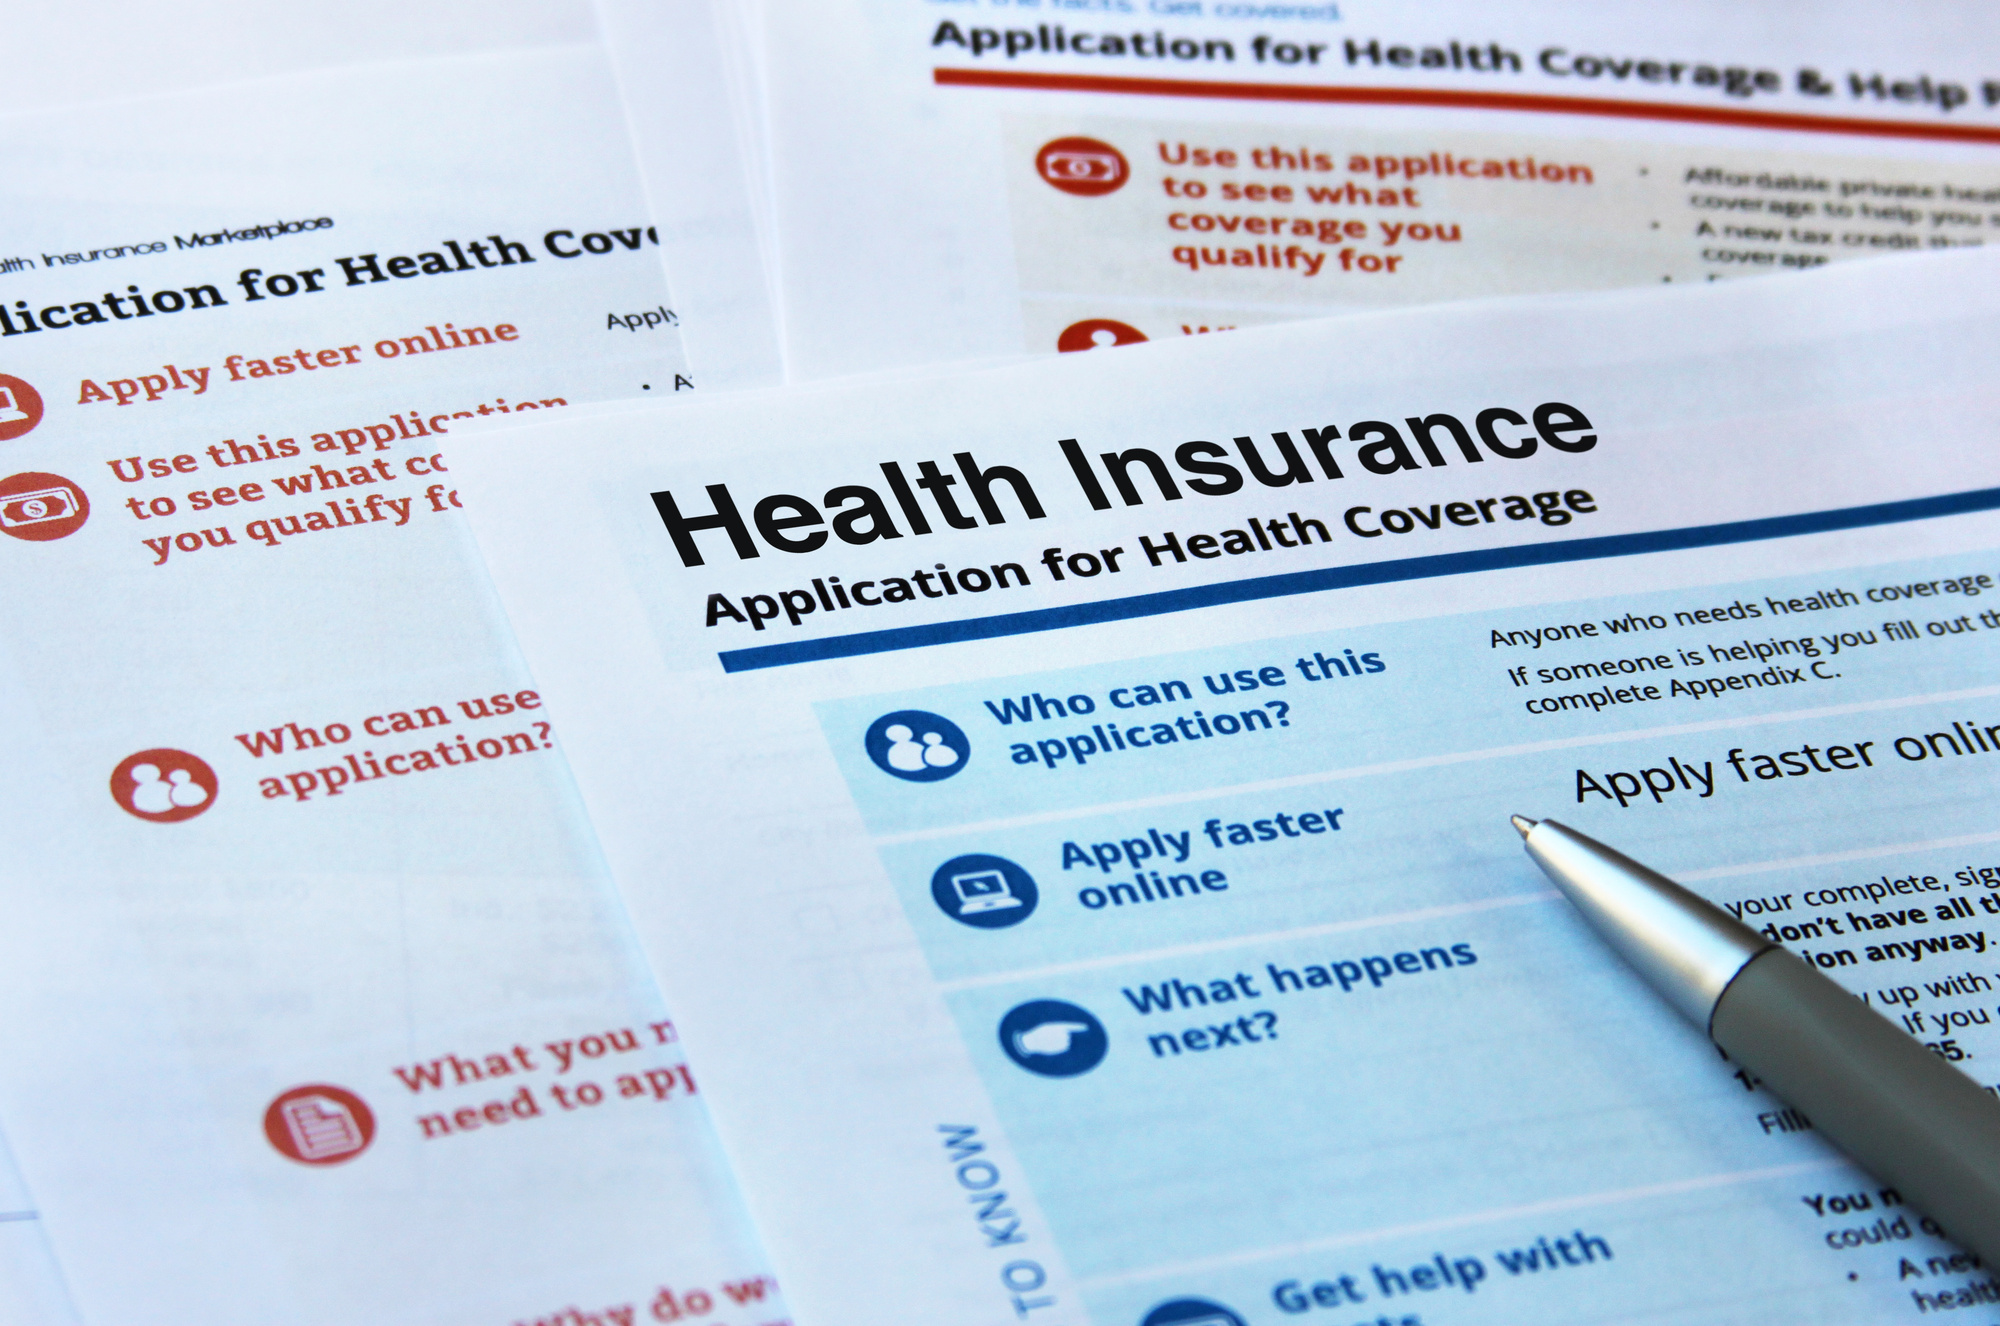 Health Insurance Form for a Self-Employed